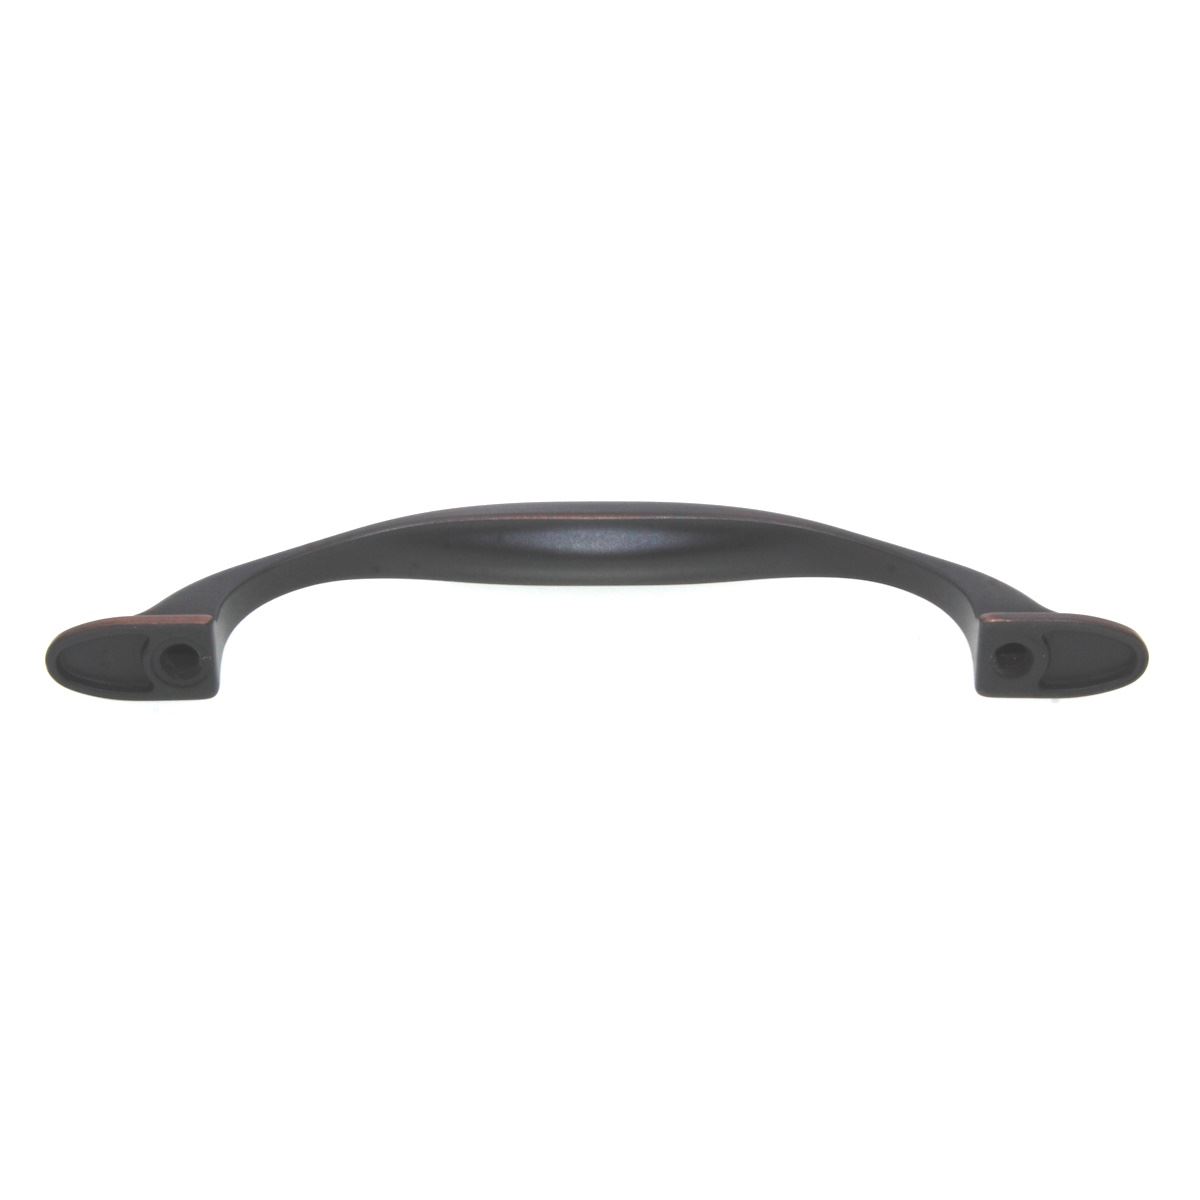 Amerock Atherly Cabinet Arch Pull 3 3/4" (96mm) Ctr Oil-Rubbed Bronze BP29295ORB